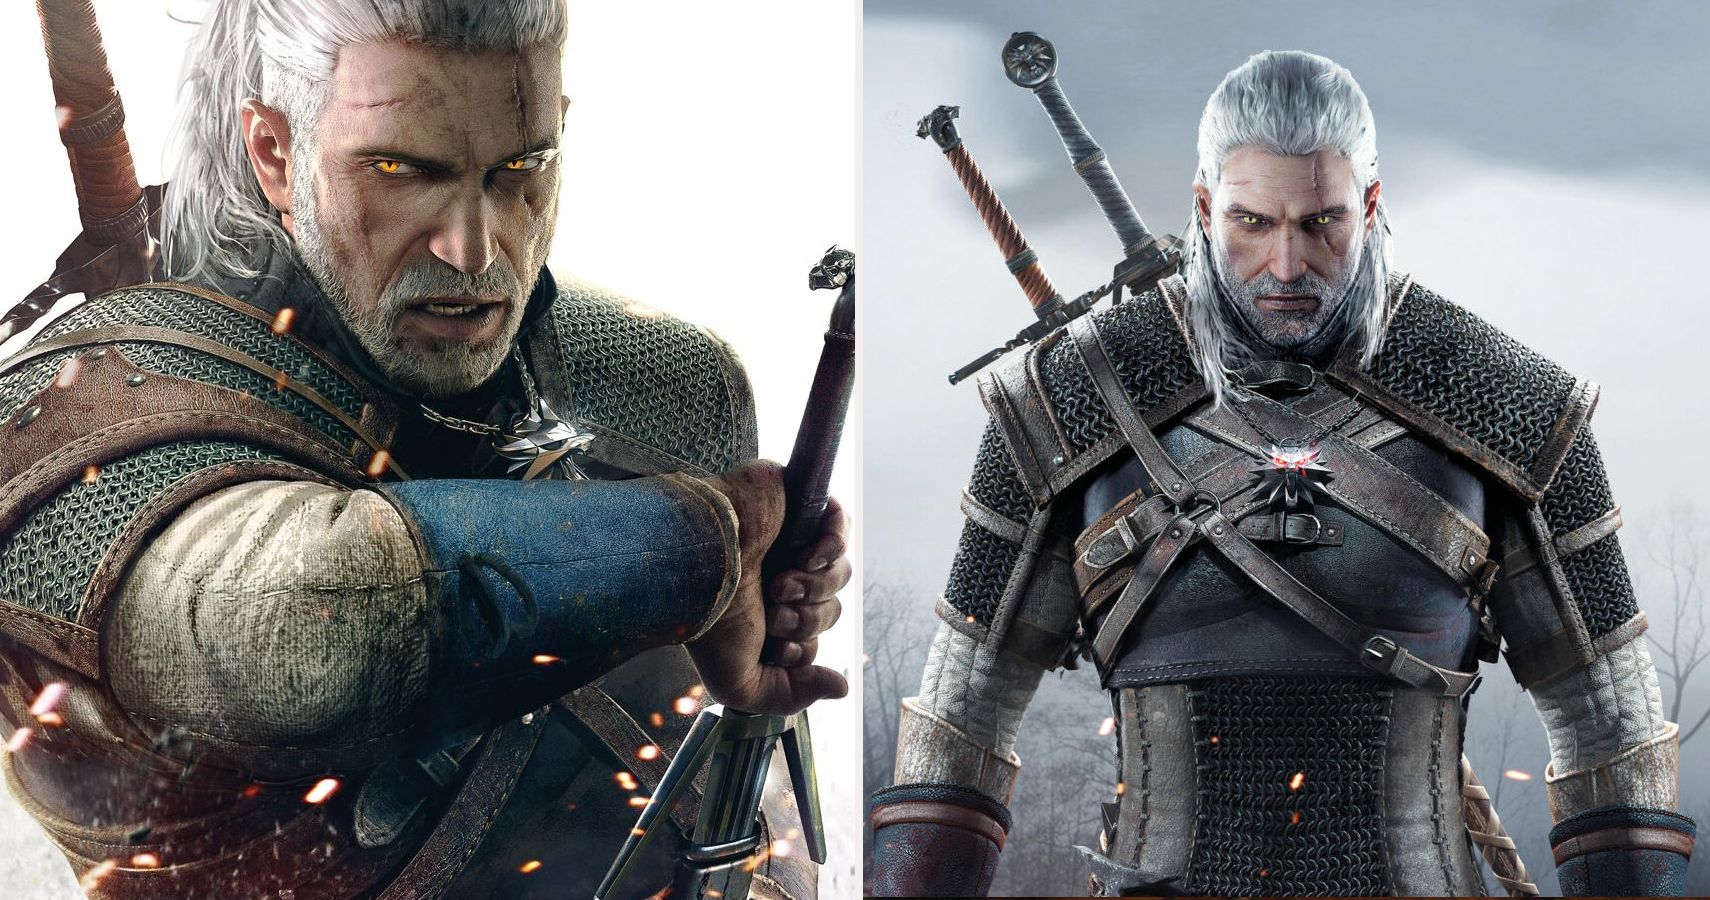 The Witcher: The 15 Most Badass Geralt Of Rivia Quotes